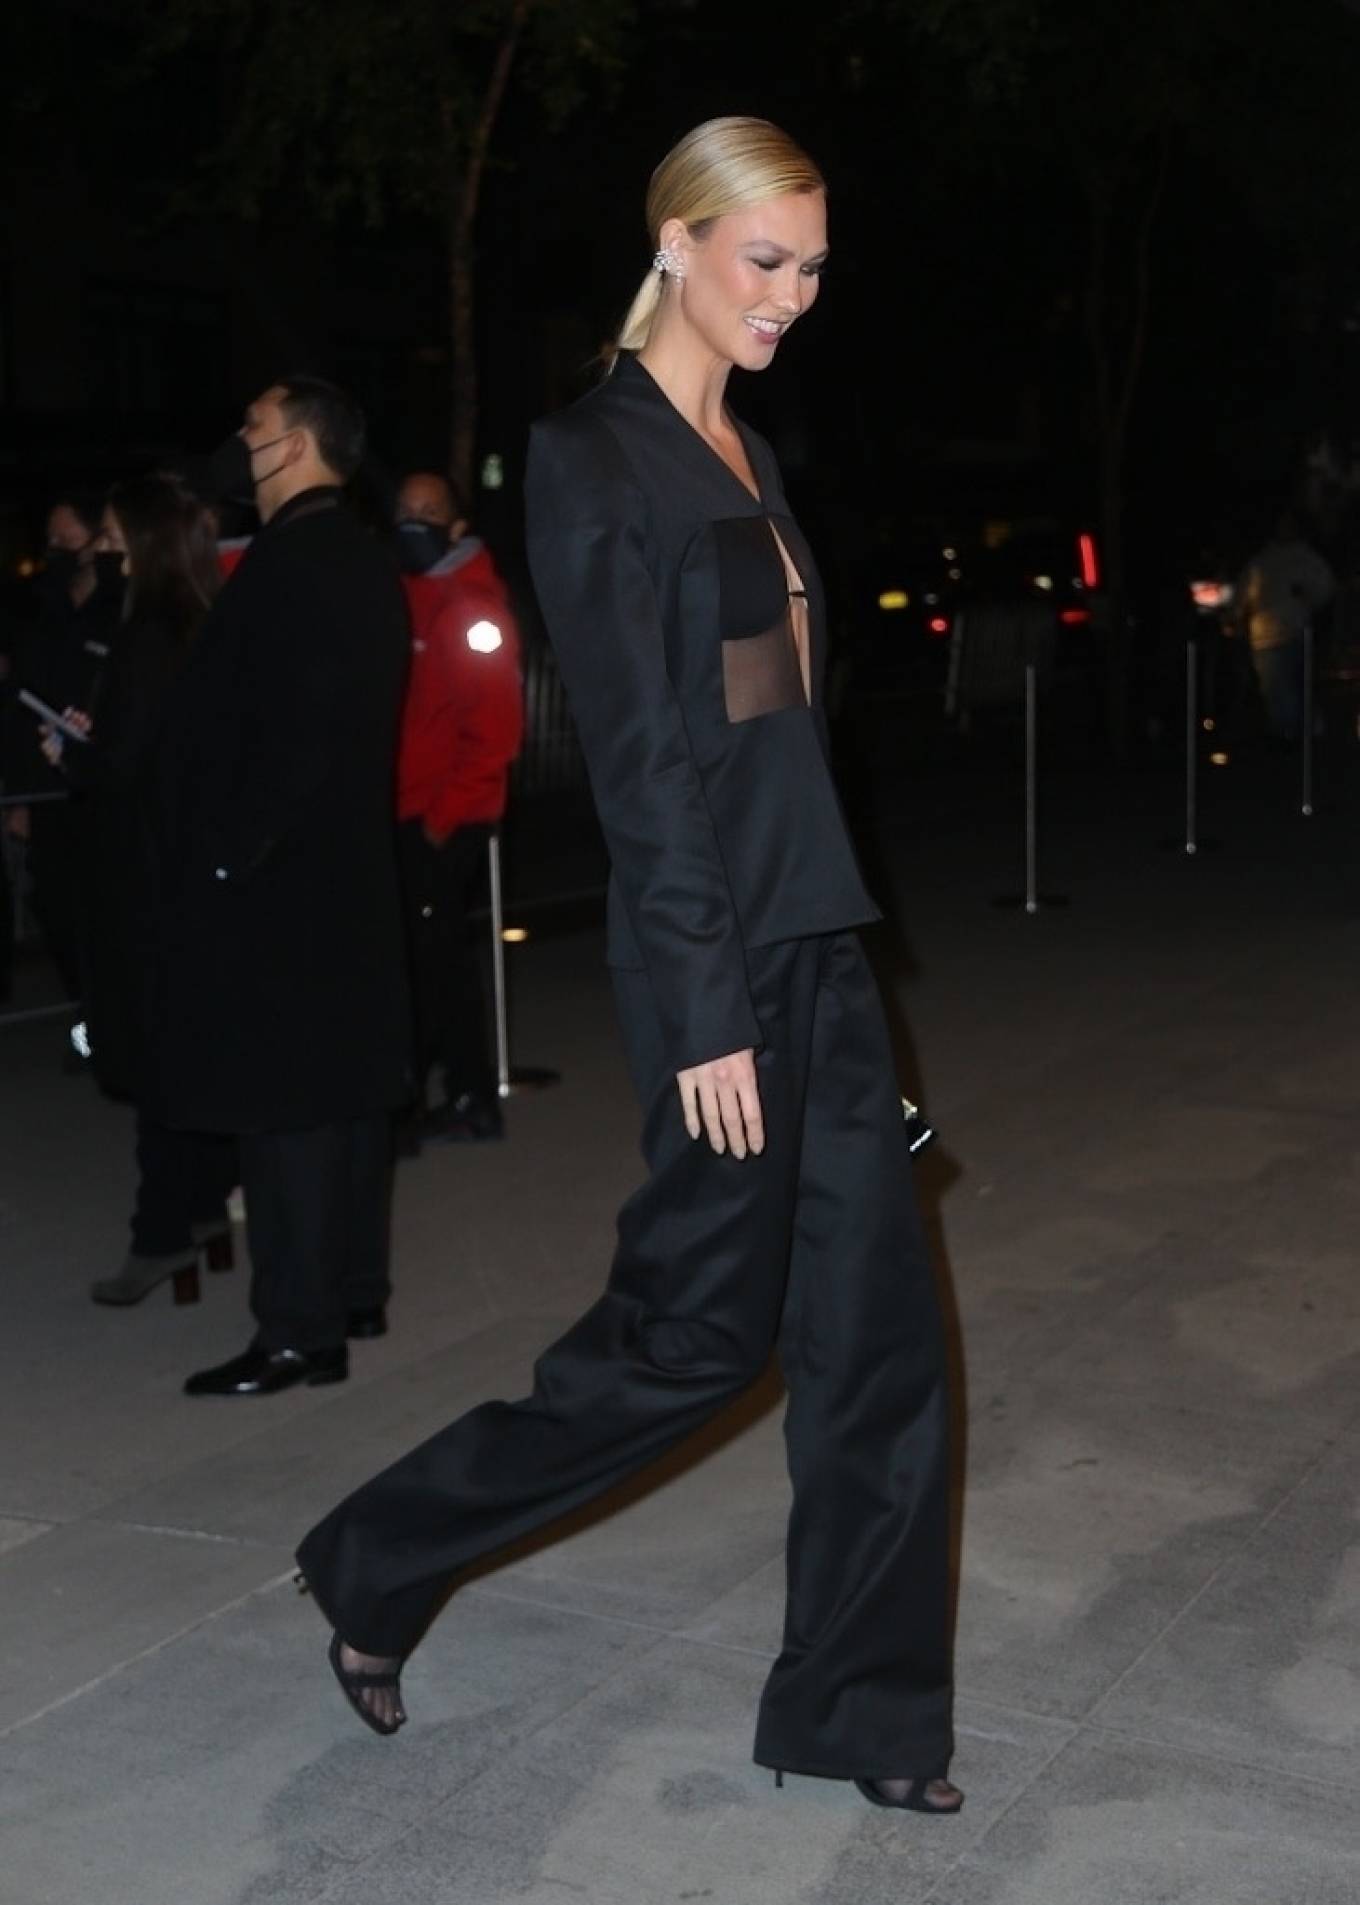 Karlie Kloss 2021 : Karlie Kloss – In a black resemble stepping out in New York City-19